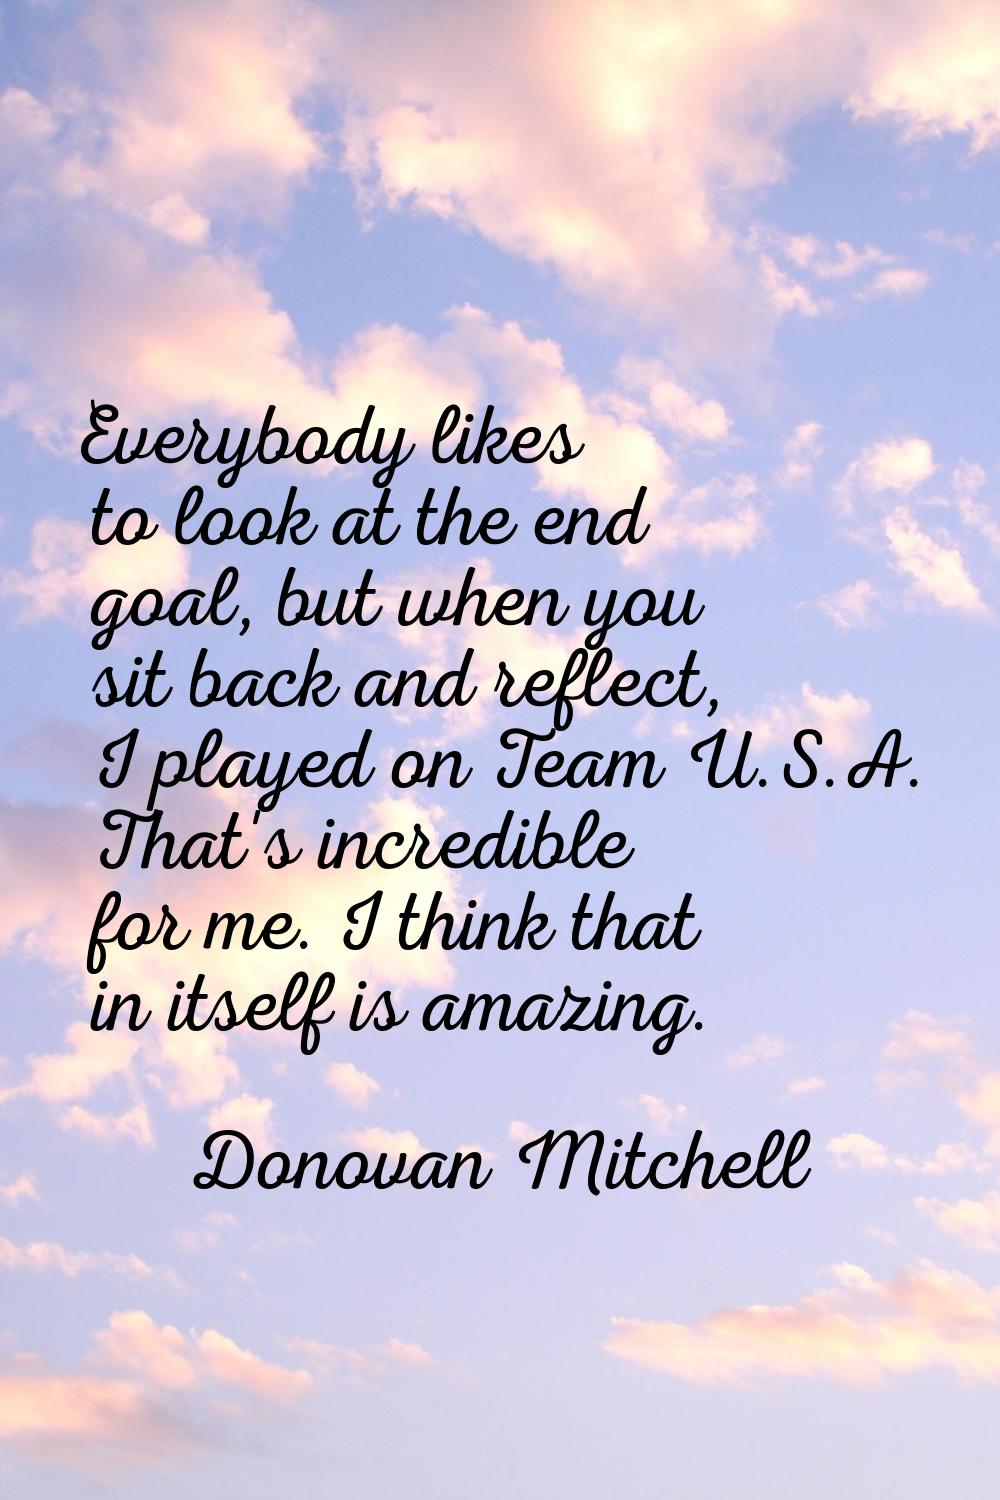 Everybody likes to look at the end goal, but when you sit back and reflect, I played on Team U.S.A.